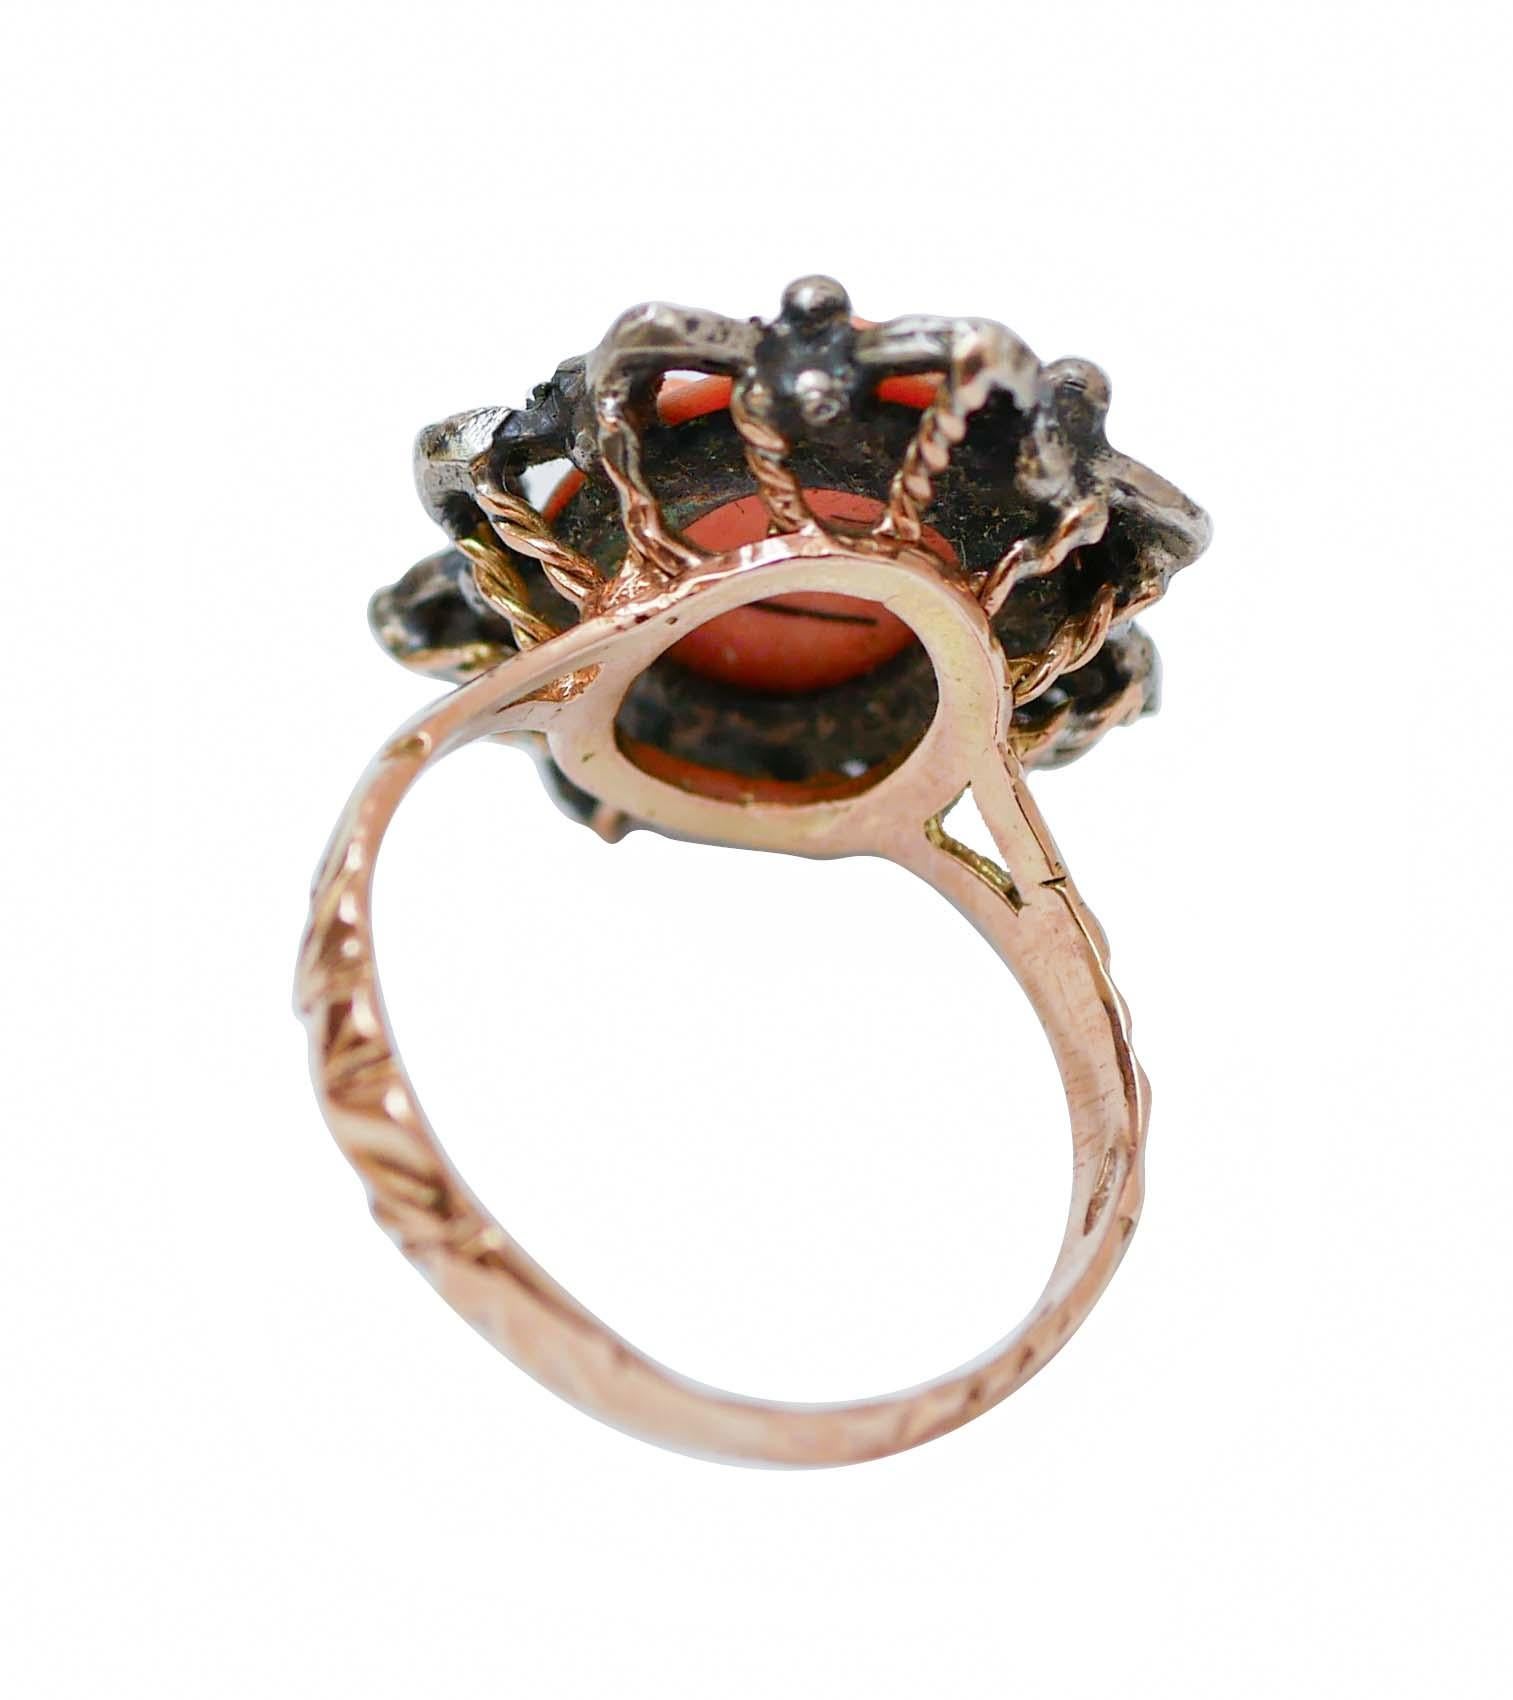 Retro Coral, Diamonds, Rose Gold and Silver Ring. For Sale